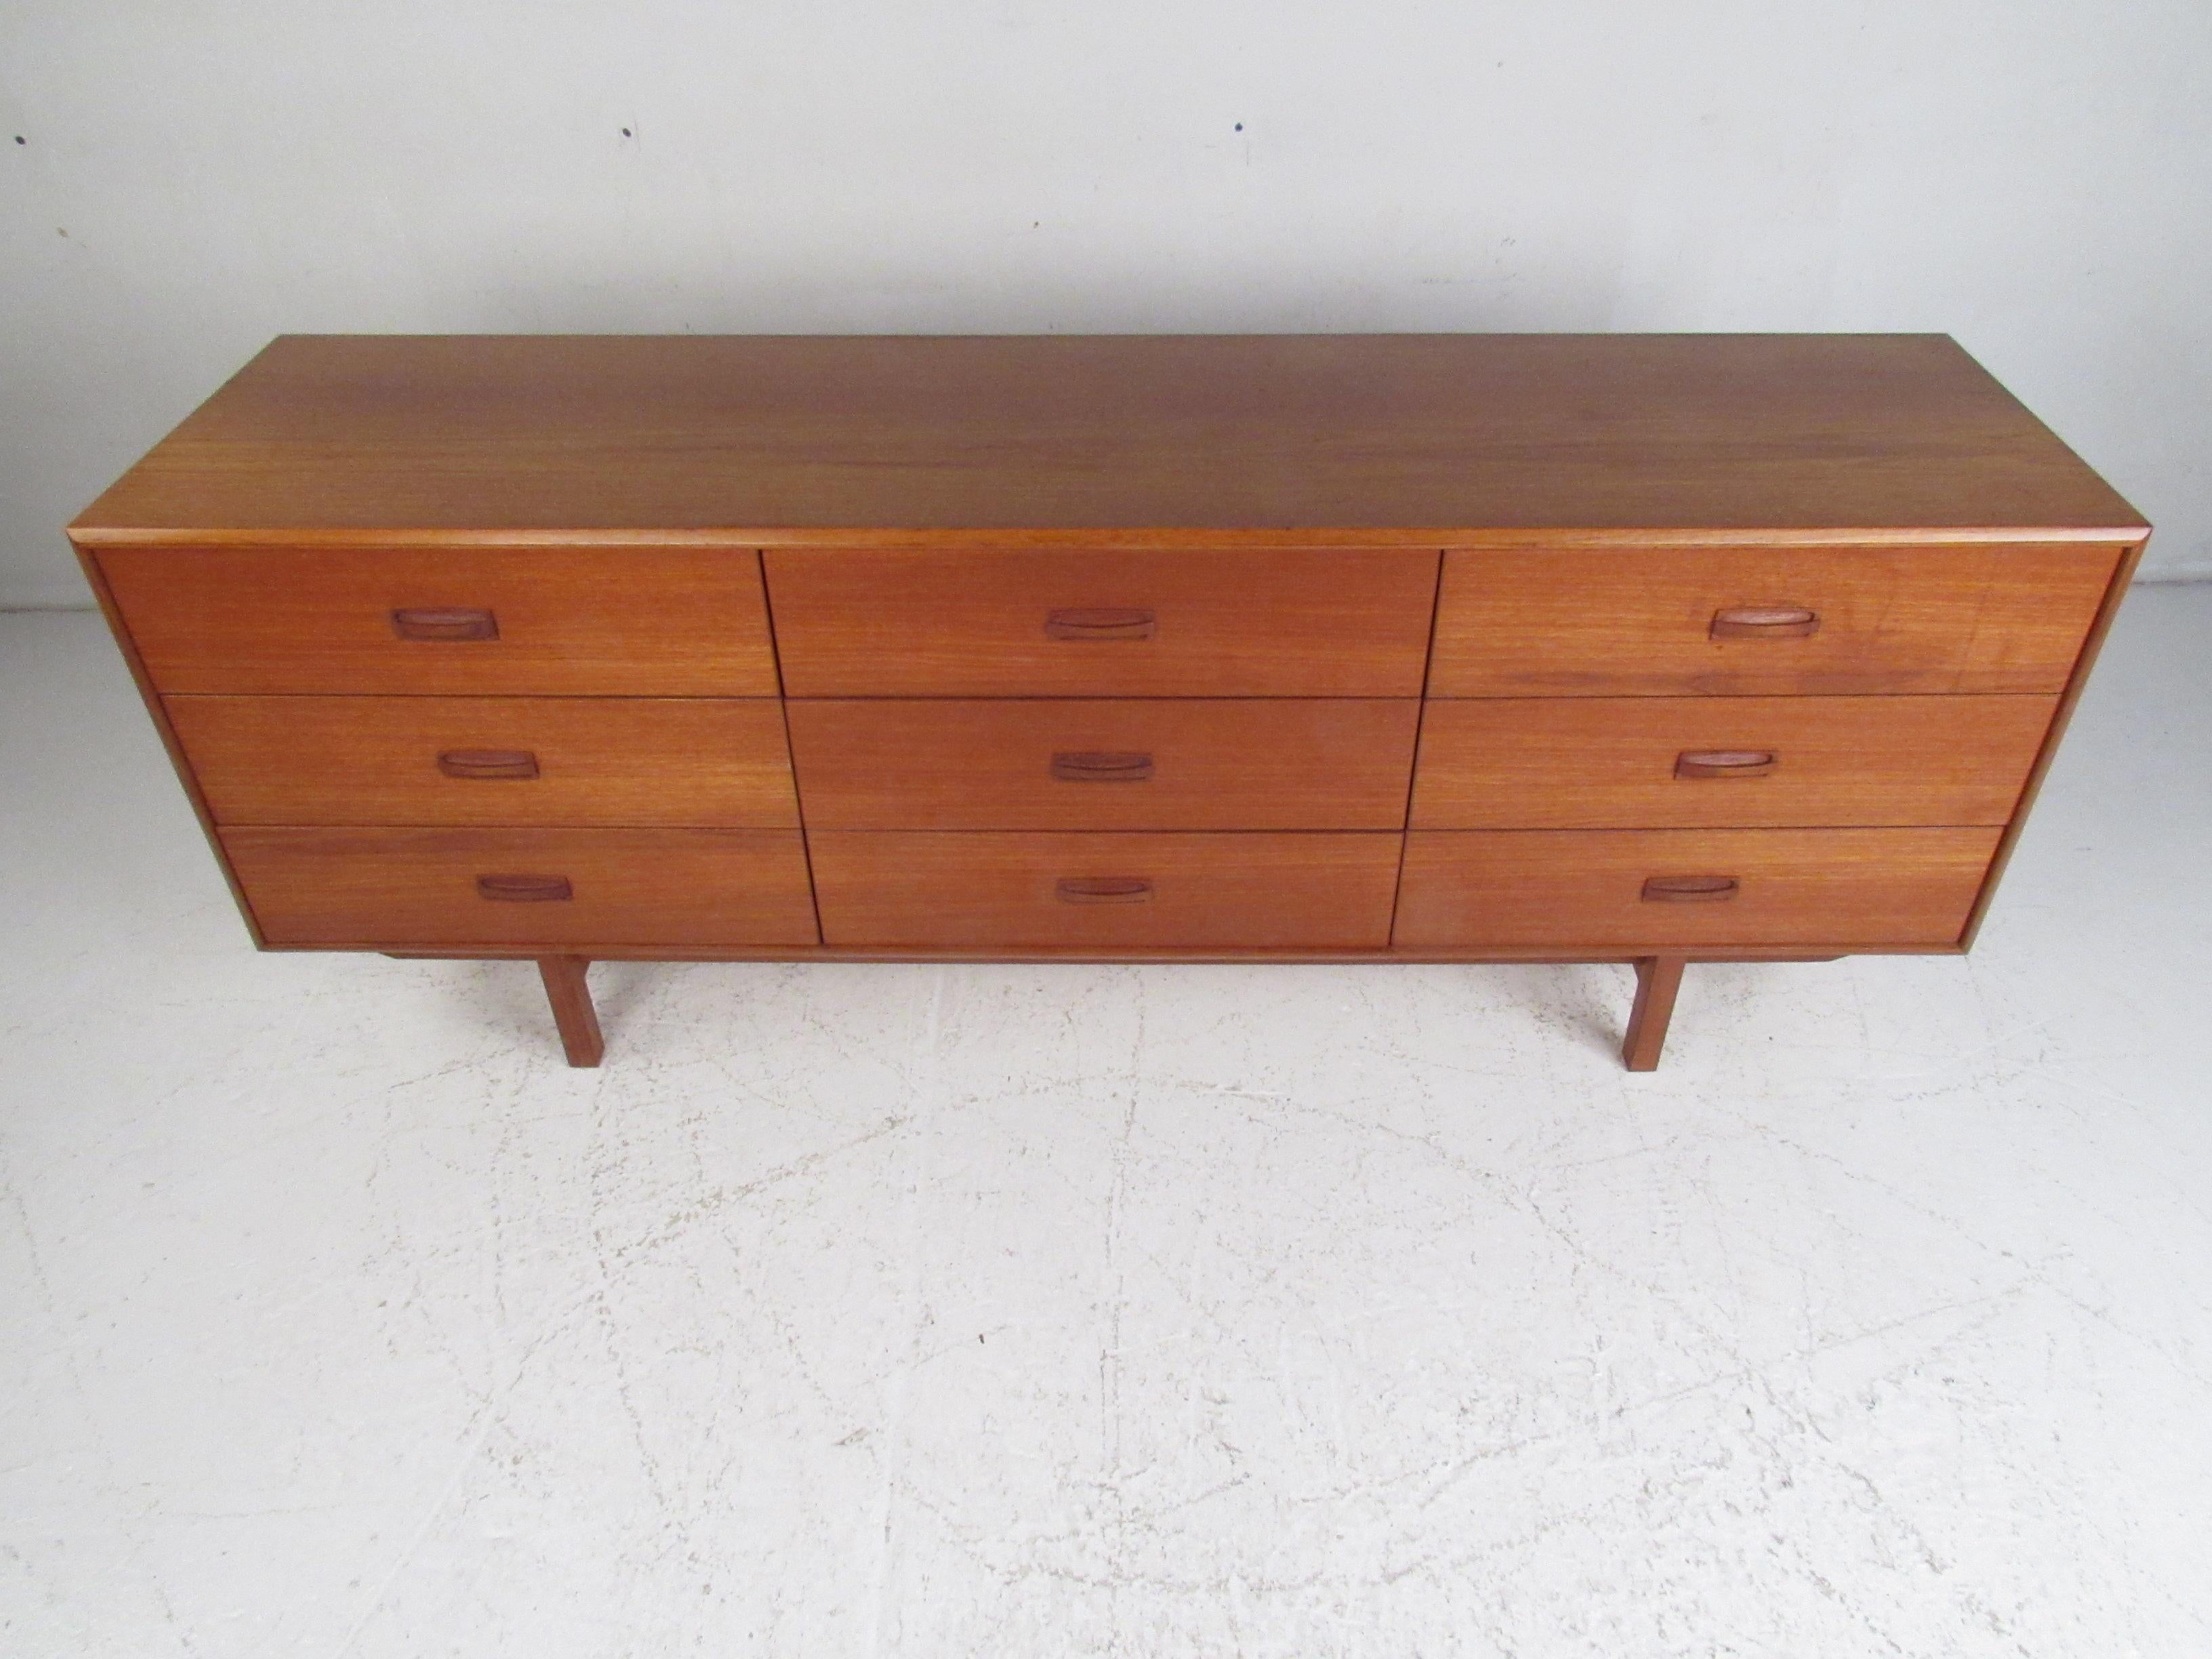 This stunning Danish modern dresser features nine hefty drawers ensuring plenty of room for storage. The clean lines, rich teak finish, and carved drawer pulls show quality craftsmanship. This sleek midcentury dresser makes the perfect addition to